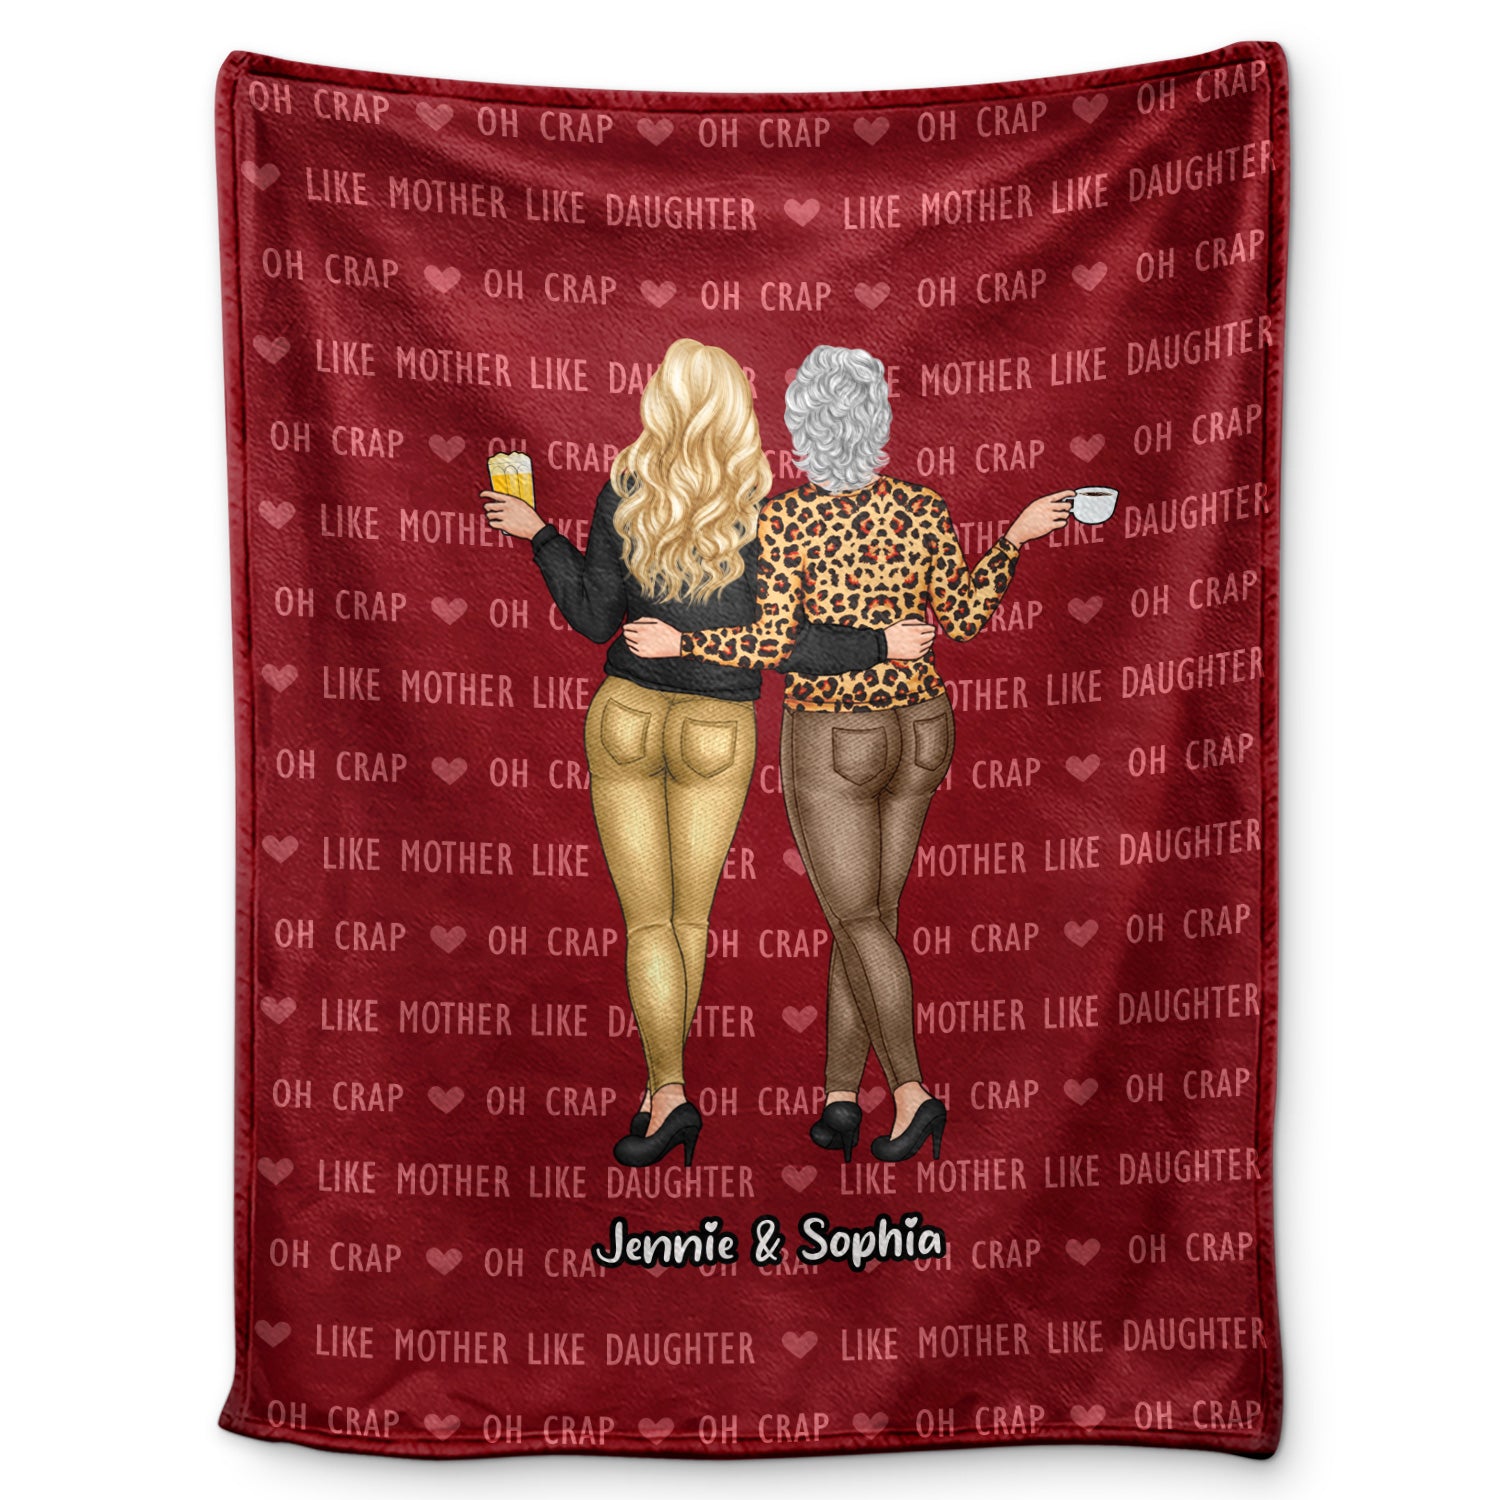 Like Mother Like Daughter - Gift For Mother And Daughter - Personalized Fleece Blanket, Sherpa Blanket